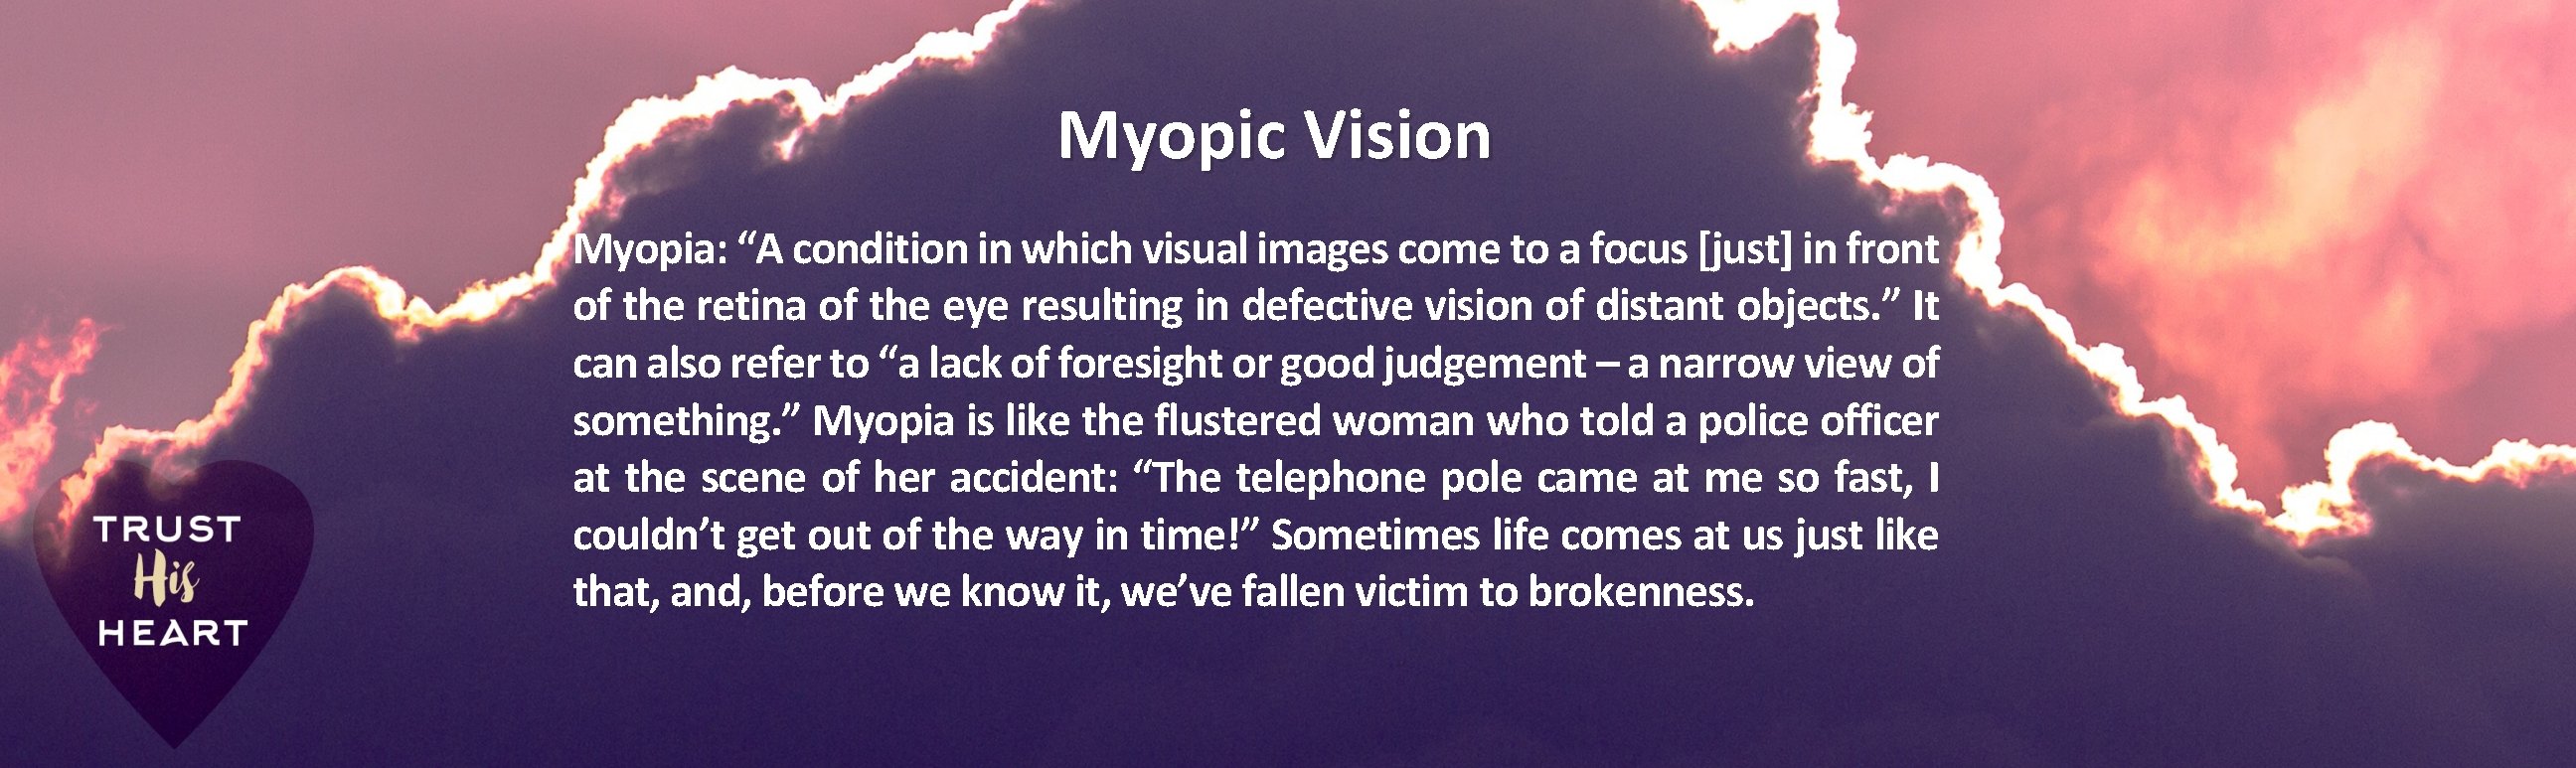 Myopic Vision Myopia: “A condition in which visual images come to a focus [just]